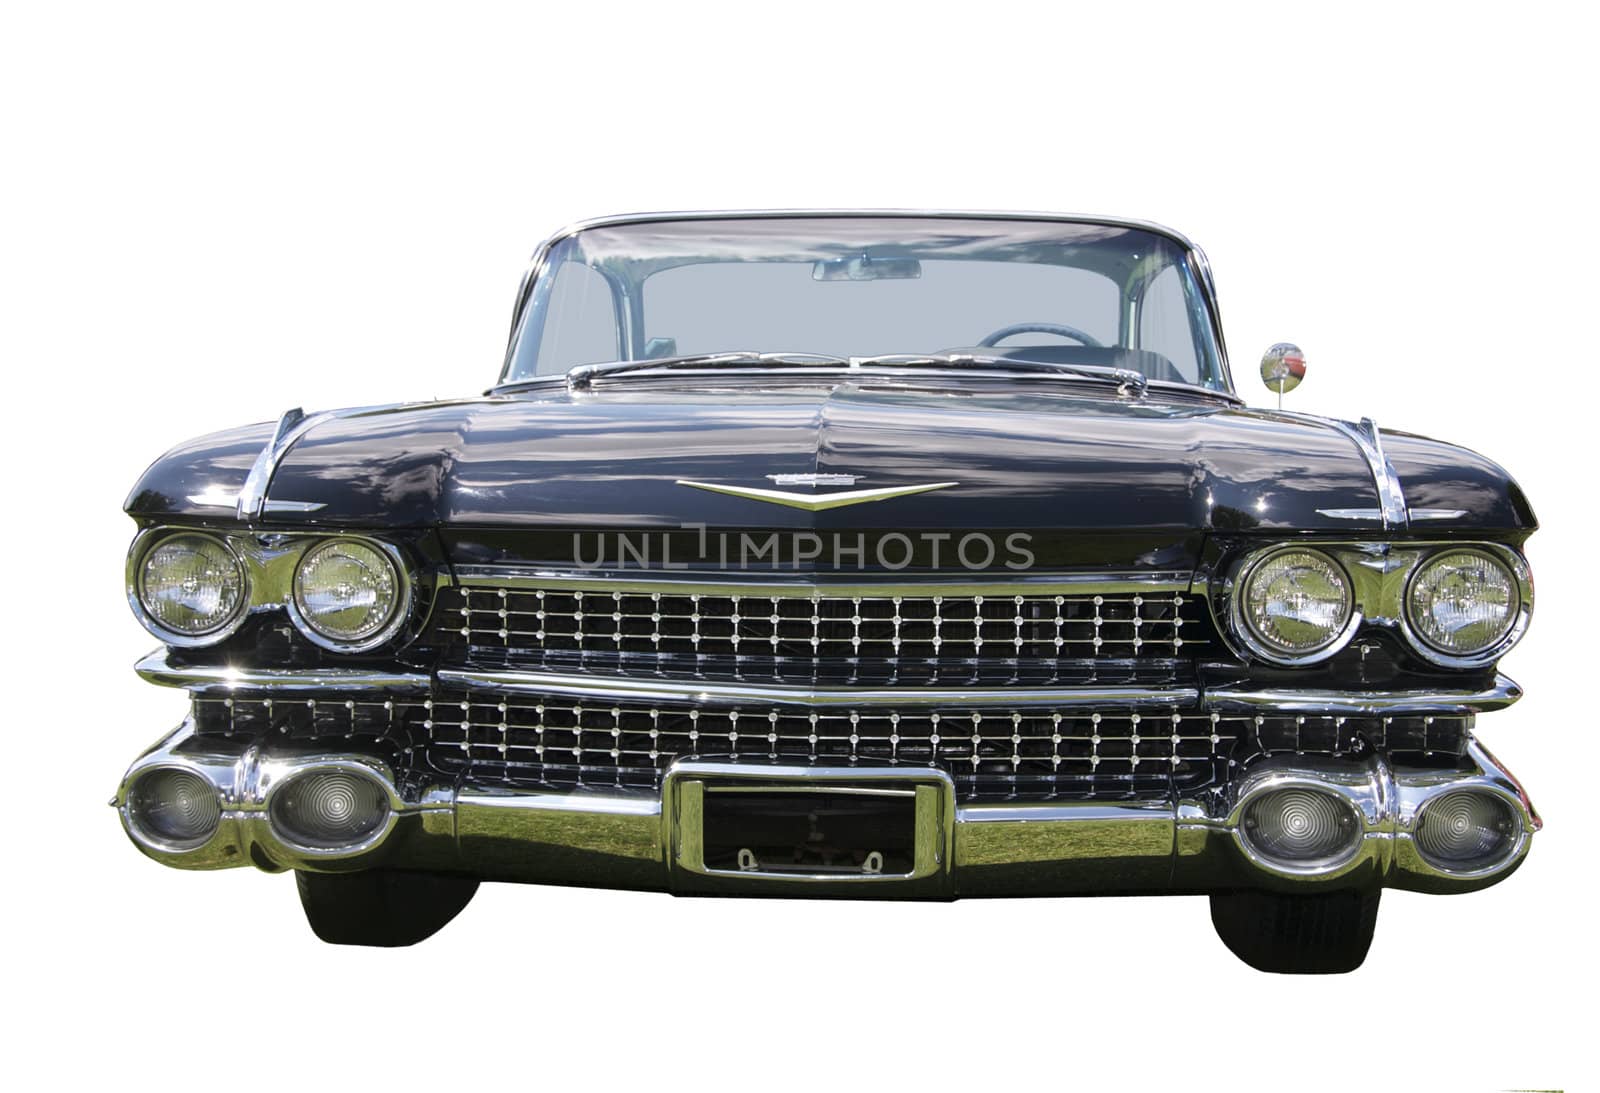 1960s classic black Cadillac isolated on white.